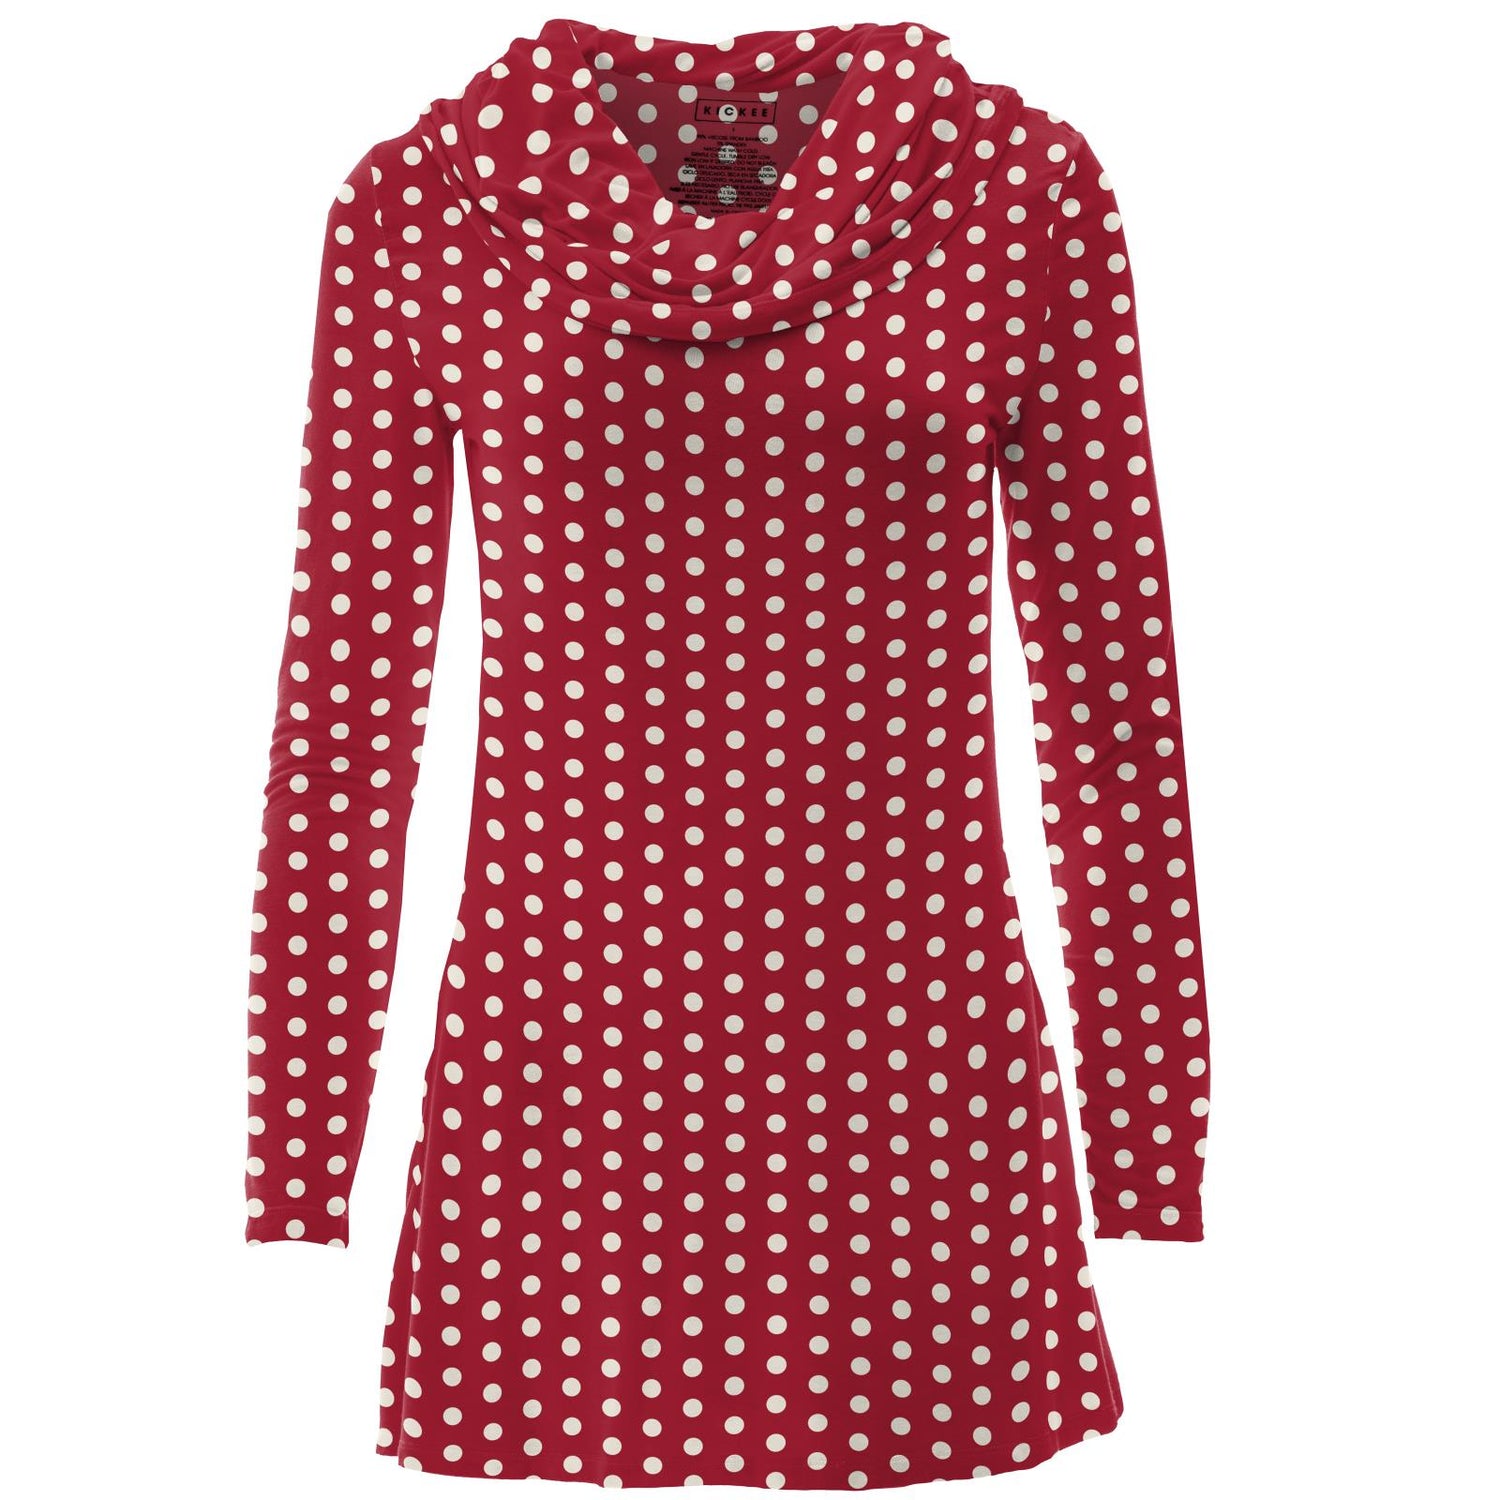 Women's Print Long Sleeve Cowl-Neck Tunic in Candy Apple Polka Dots